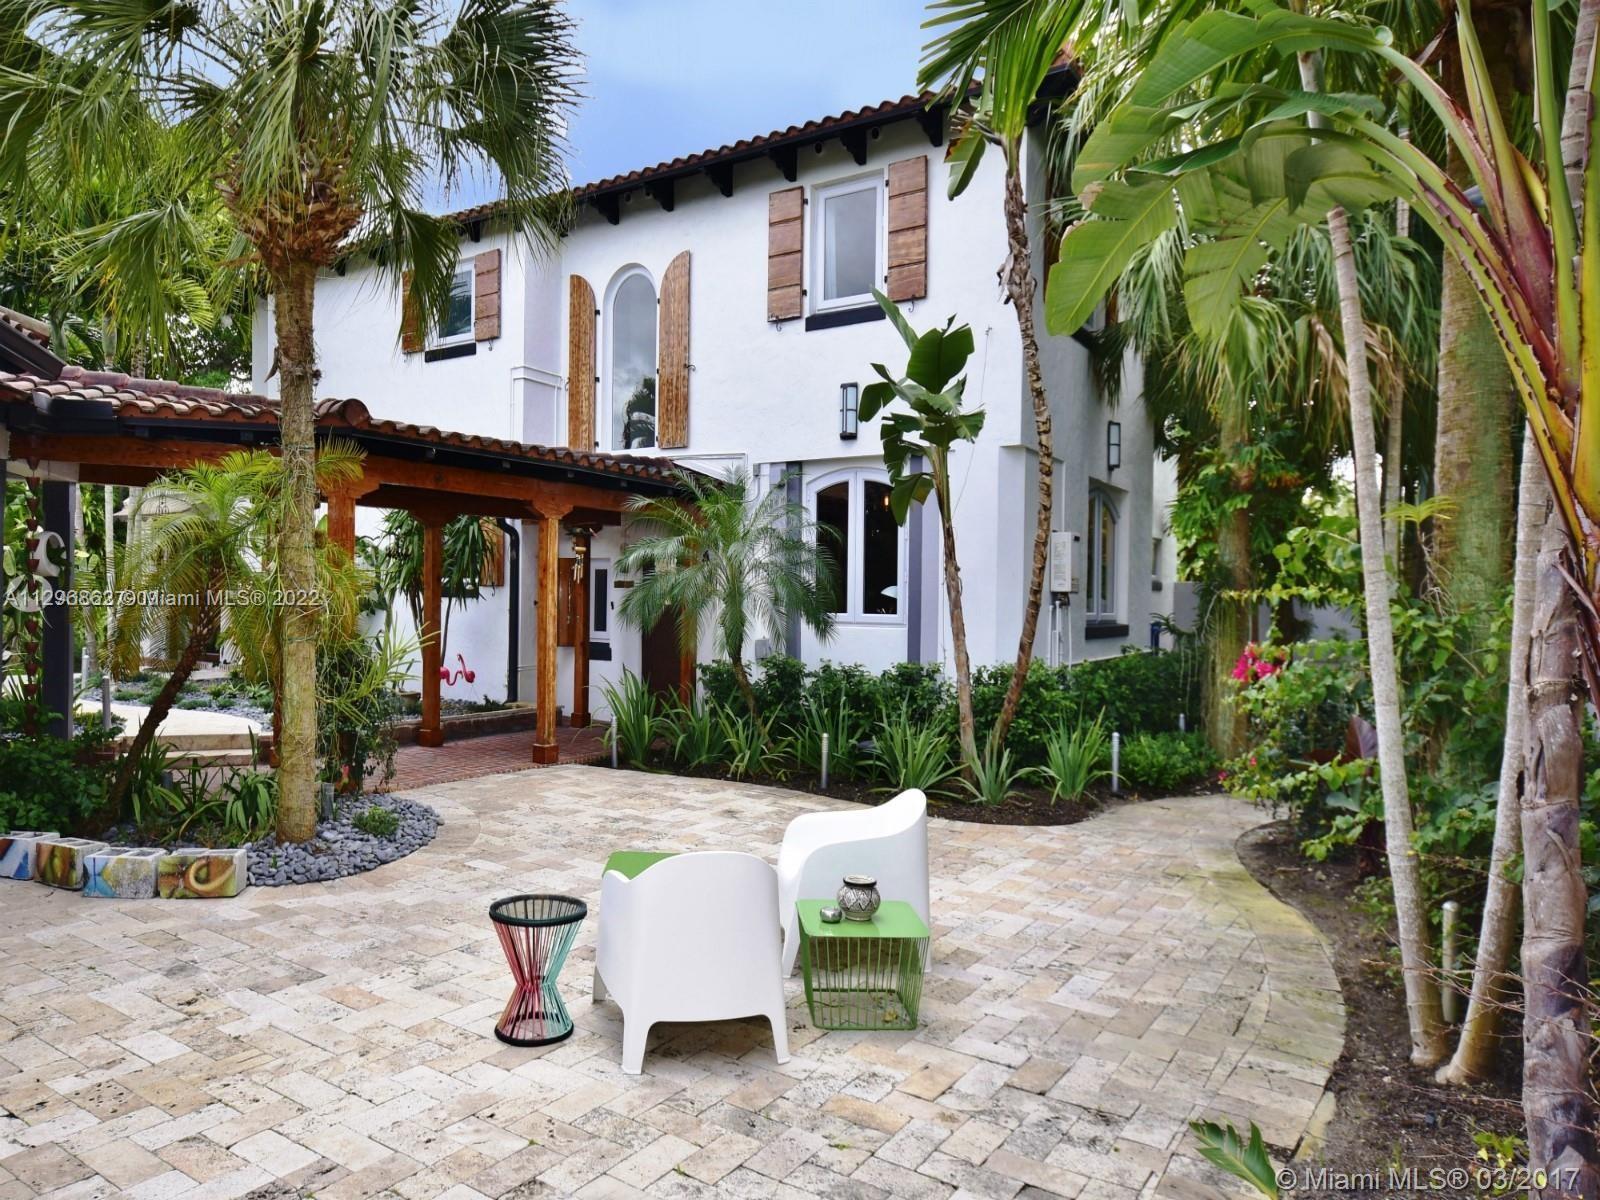 PRIVATE AND HIDDEN OASIS in glamorous Miami Shores! Restored and remodeled Old Spanish-style luxury 